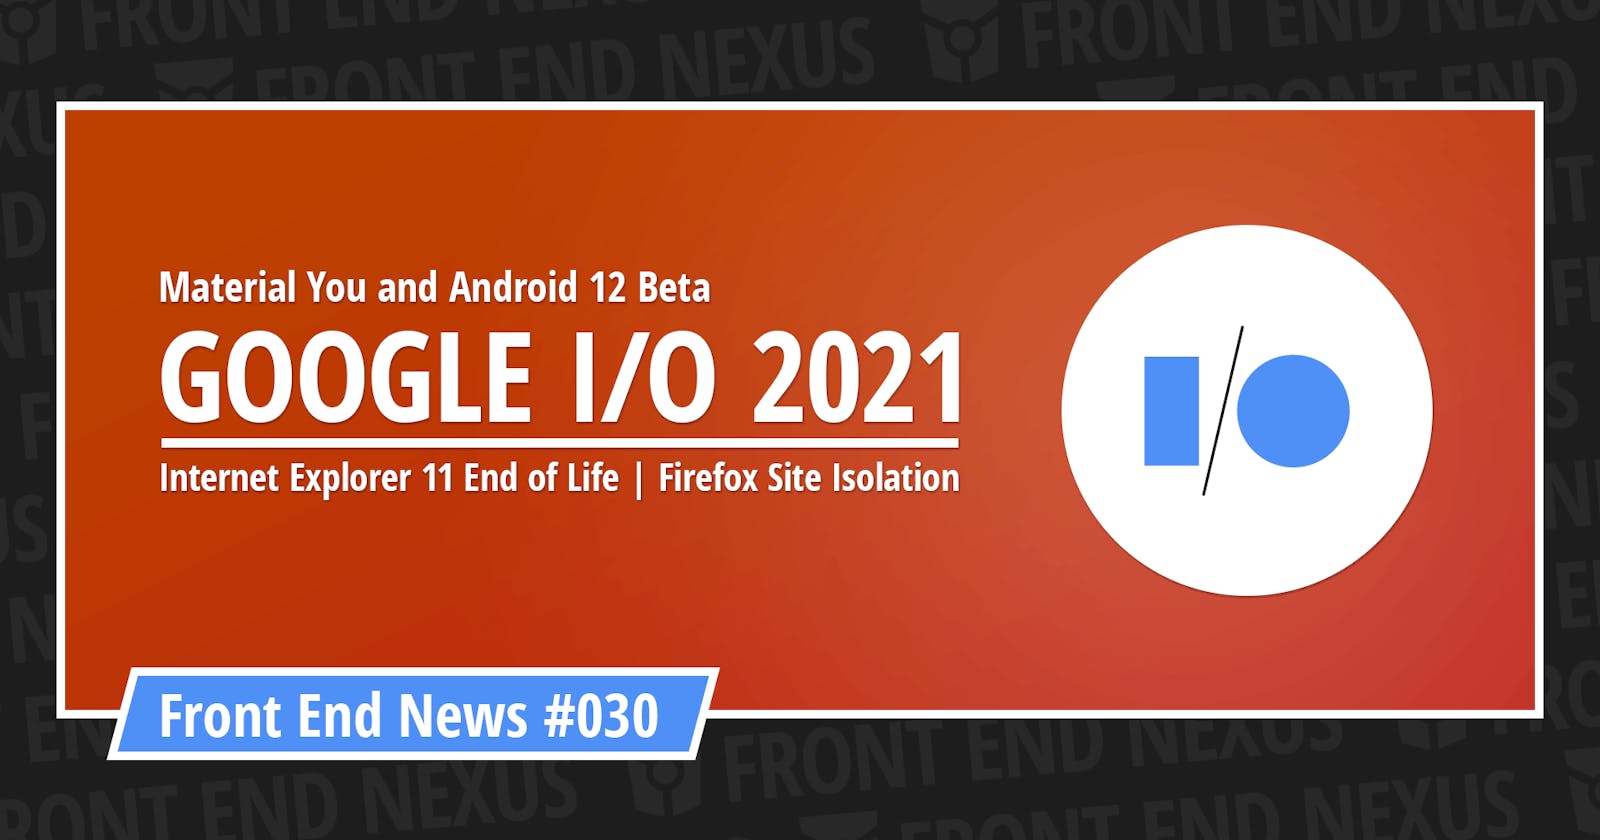 Material You and Android 12 Beta from Google I/O, the end of IE11, and Firefox Site Isolation | Front End News #030